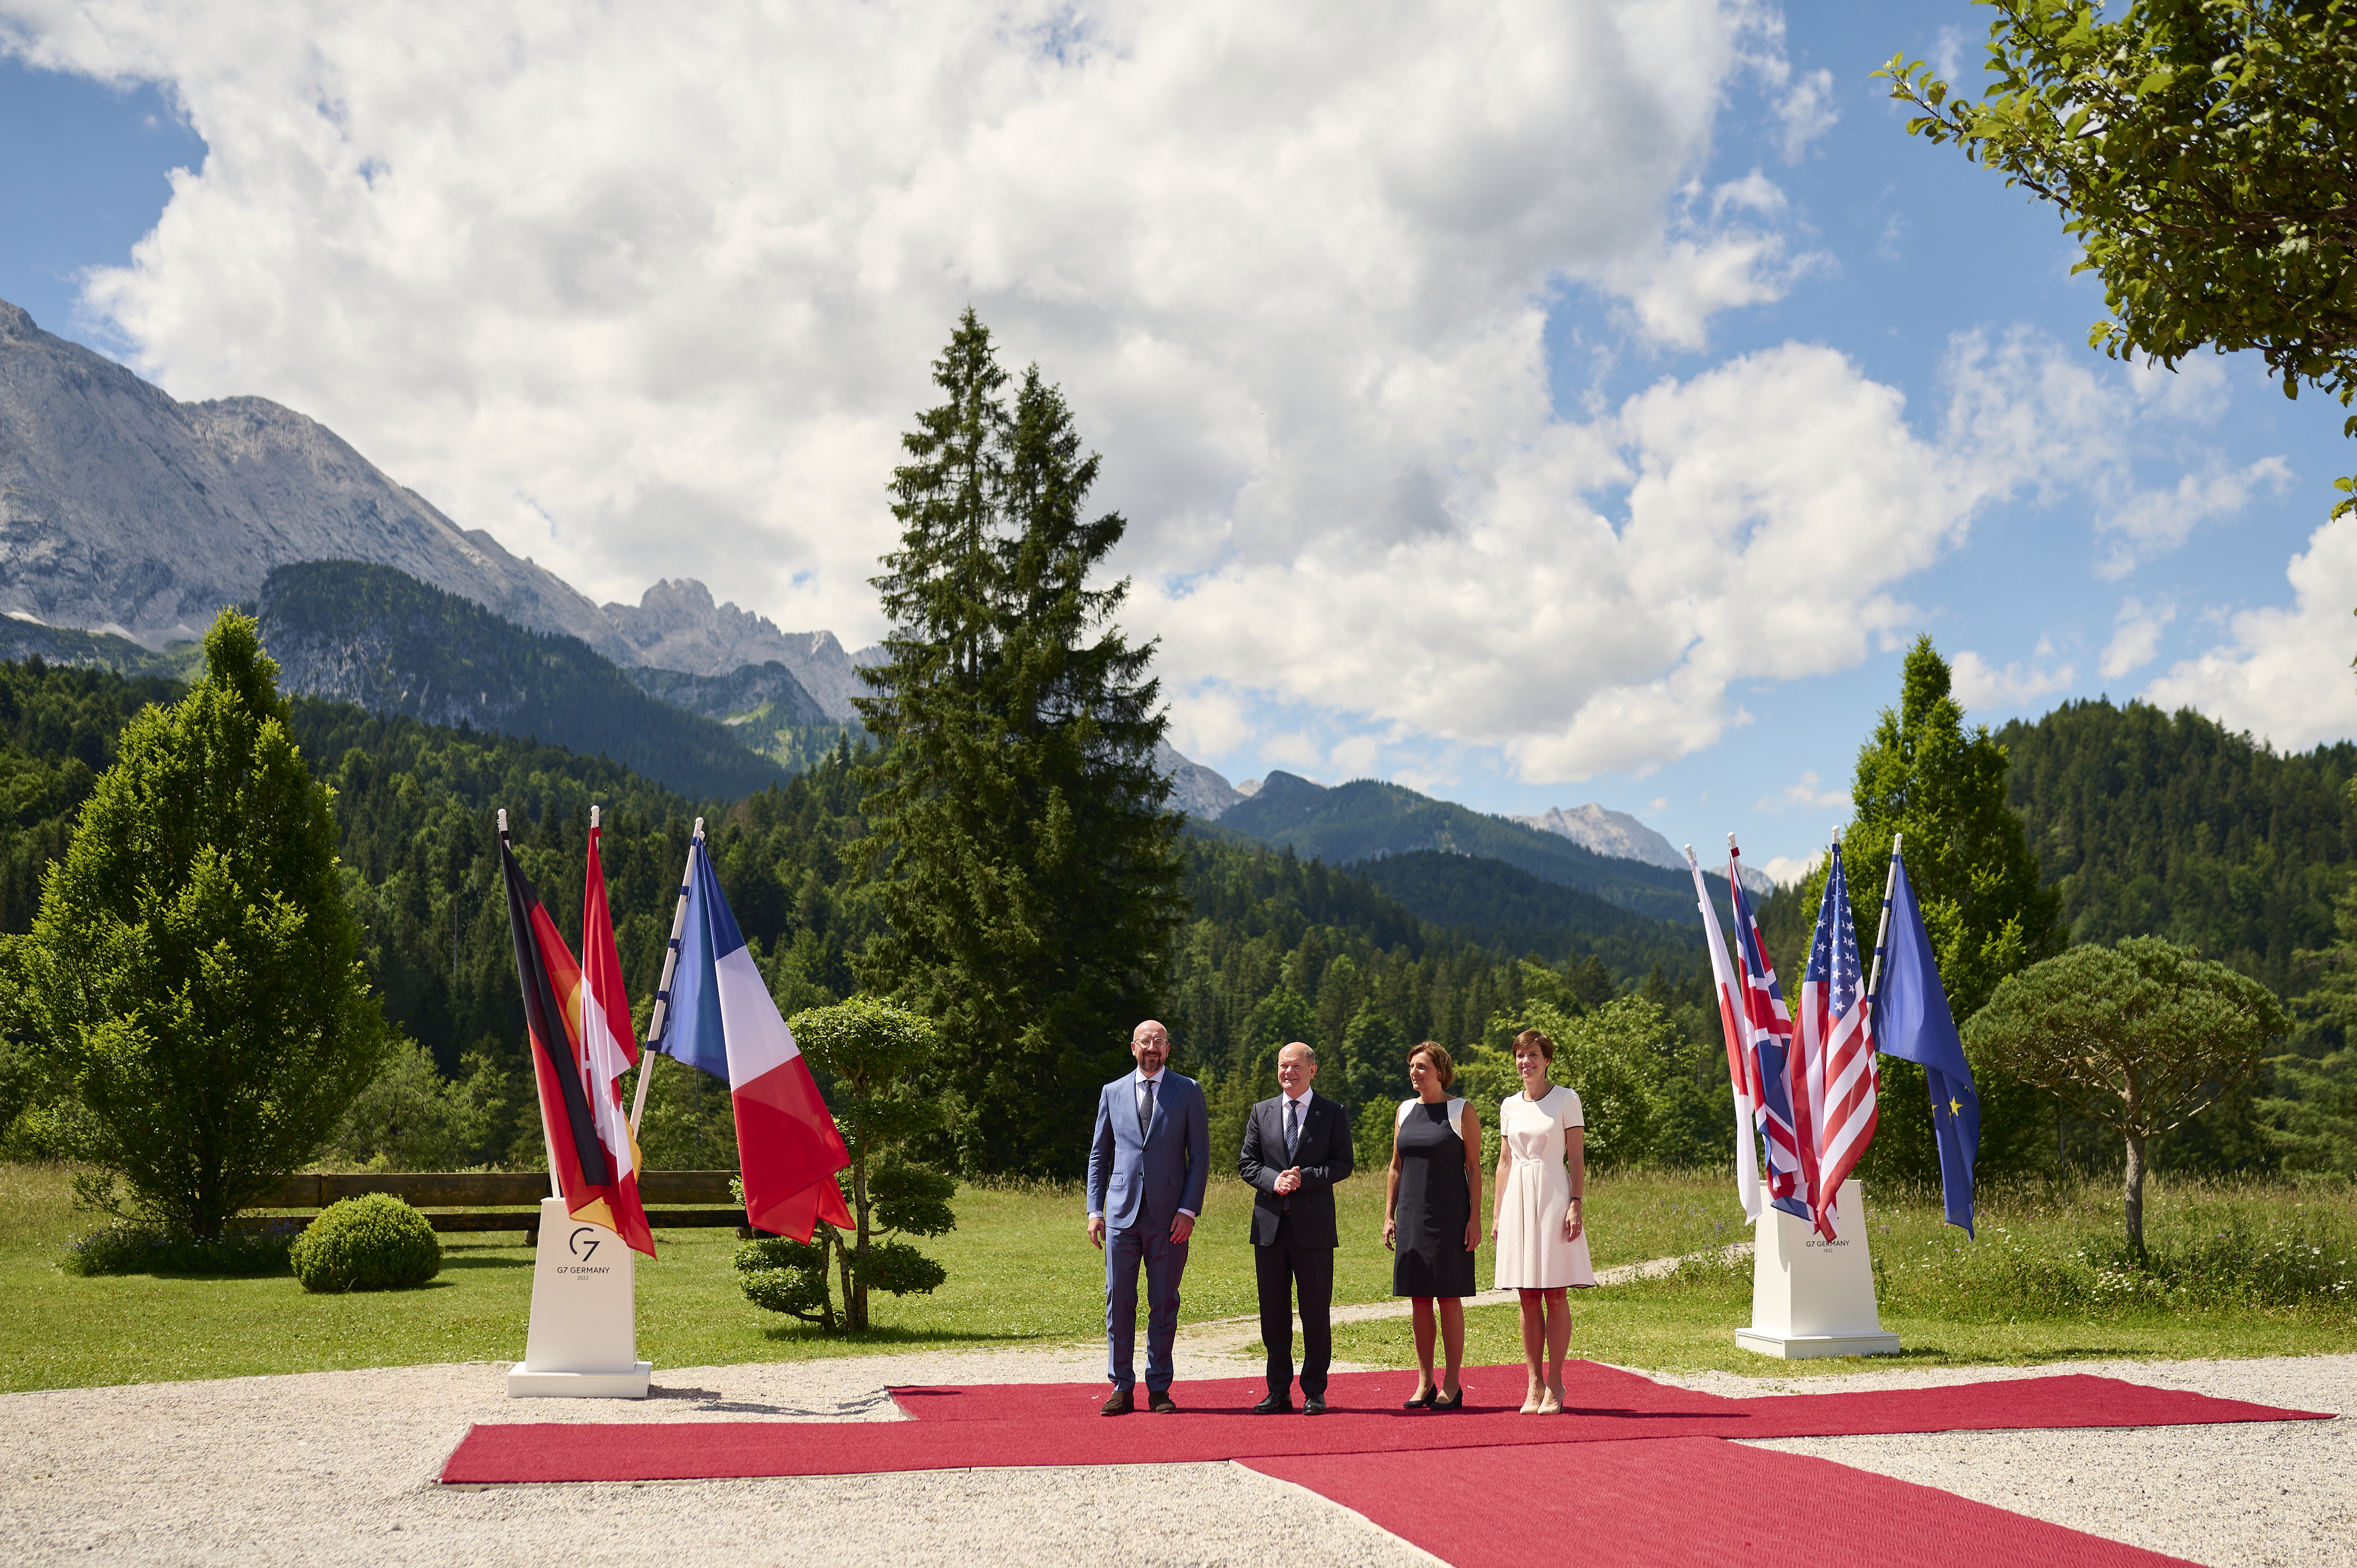 Federal Chancellor Olaf Scholz and his wife Britta Ernst welcome Charles Michel (European Council President) and his wife Amélie Derbaudrenghien to the G7 Summit in Schloss Elmau.